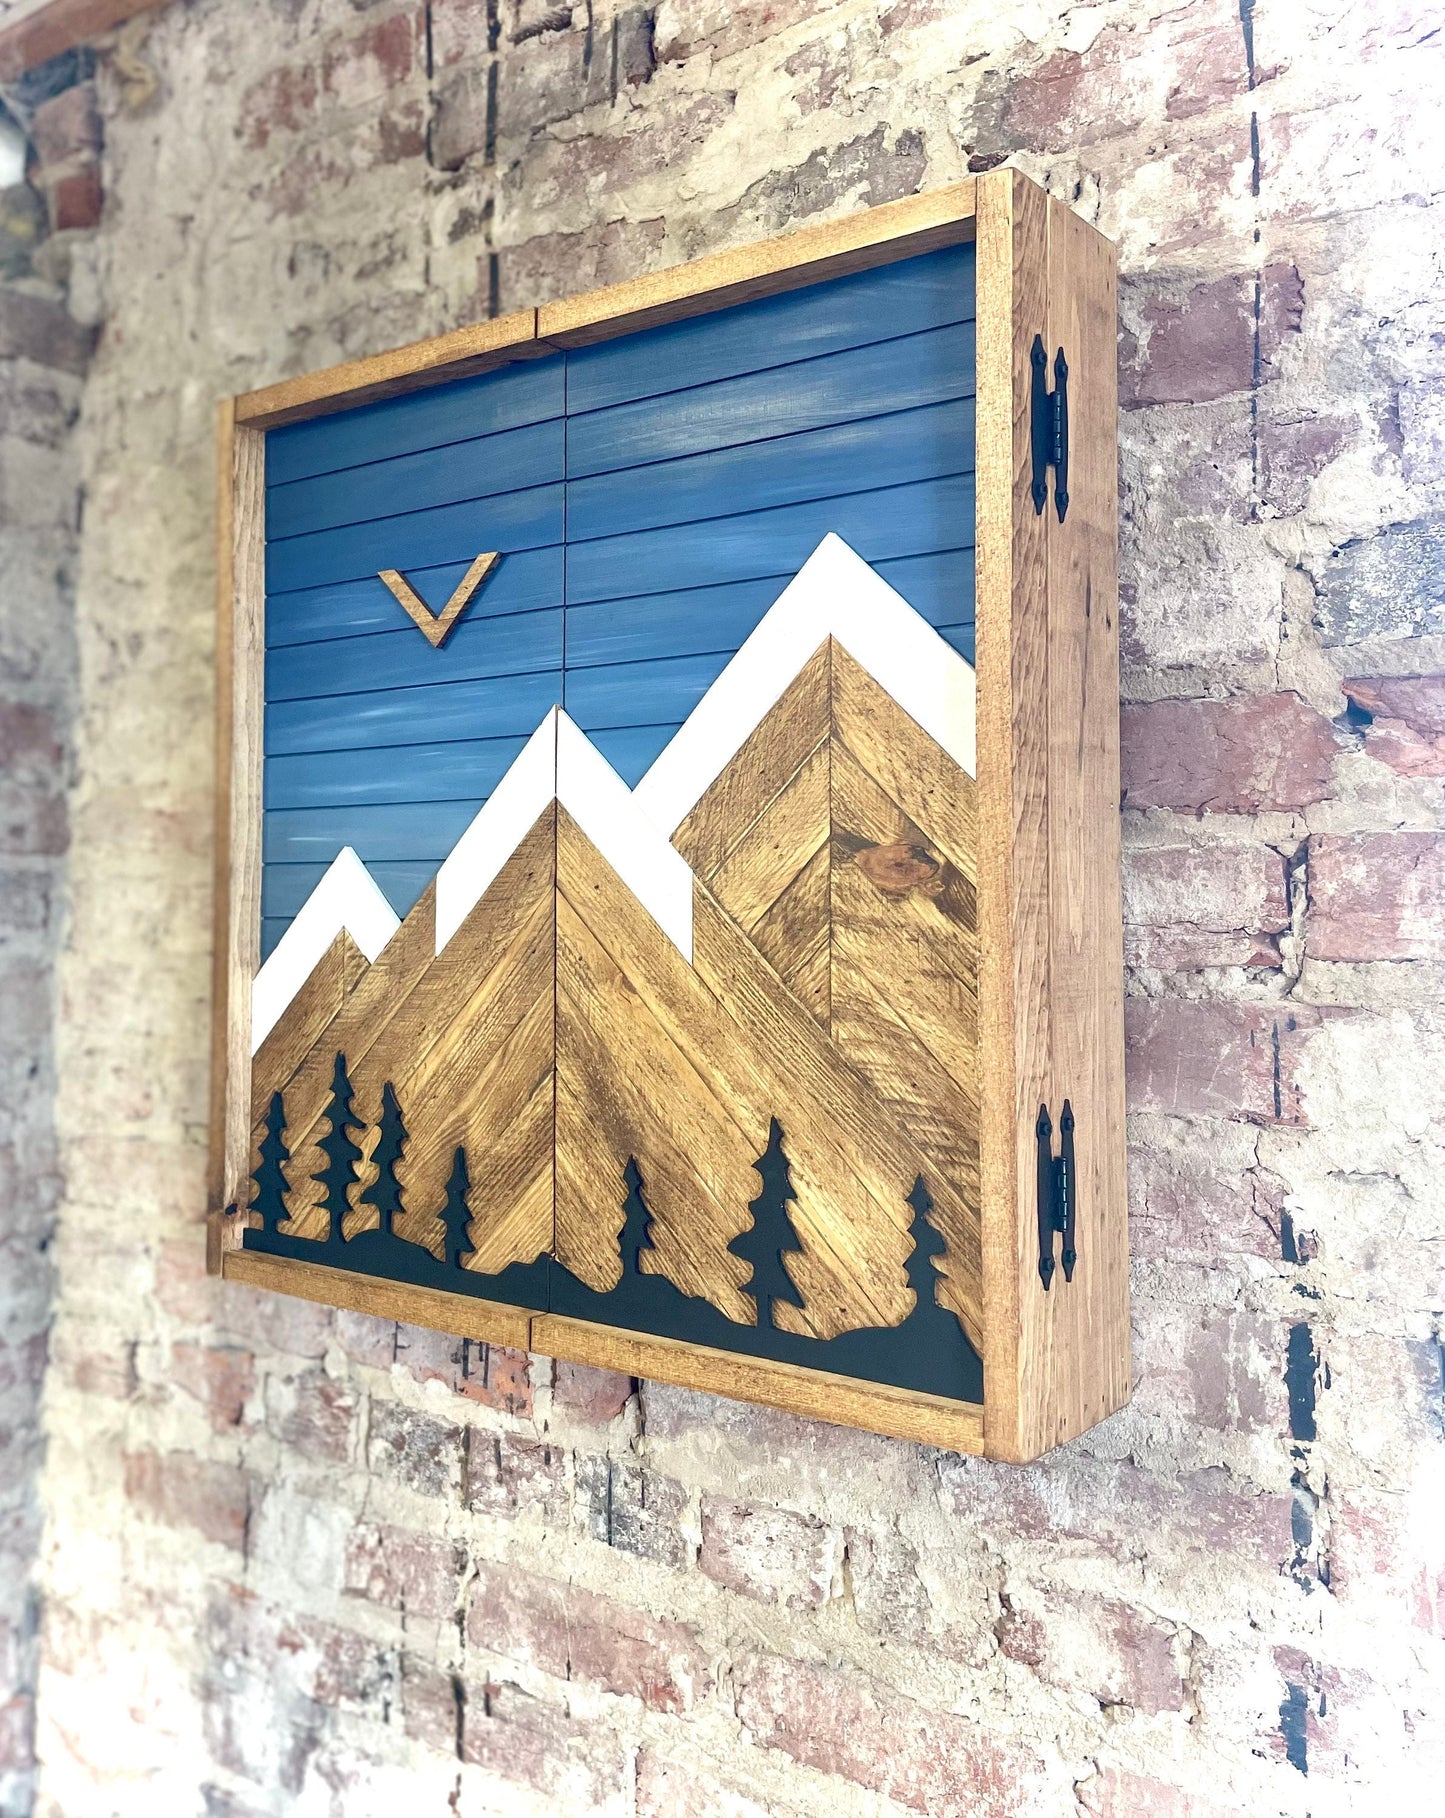 Rustic Dartboard Cabinet - Rustic Blue Sky w/ Trees Mountain Art  26”x26” - Rustic Cabinet - Game Room / Man Cave Art - Wall Decor - Cabinet